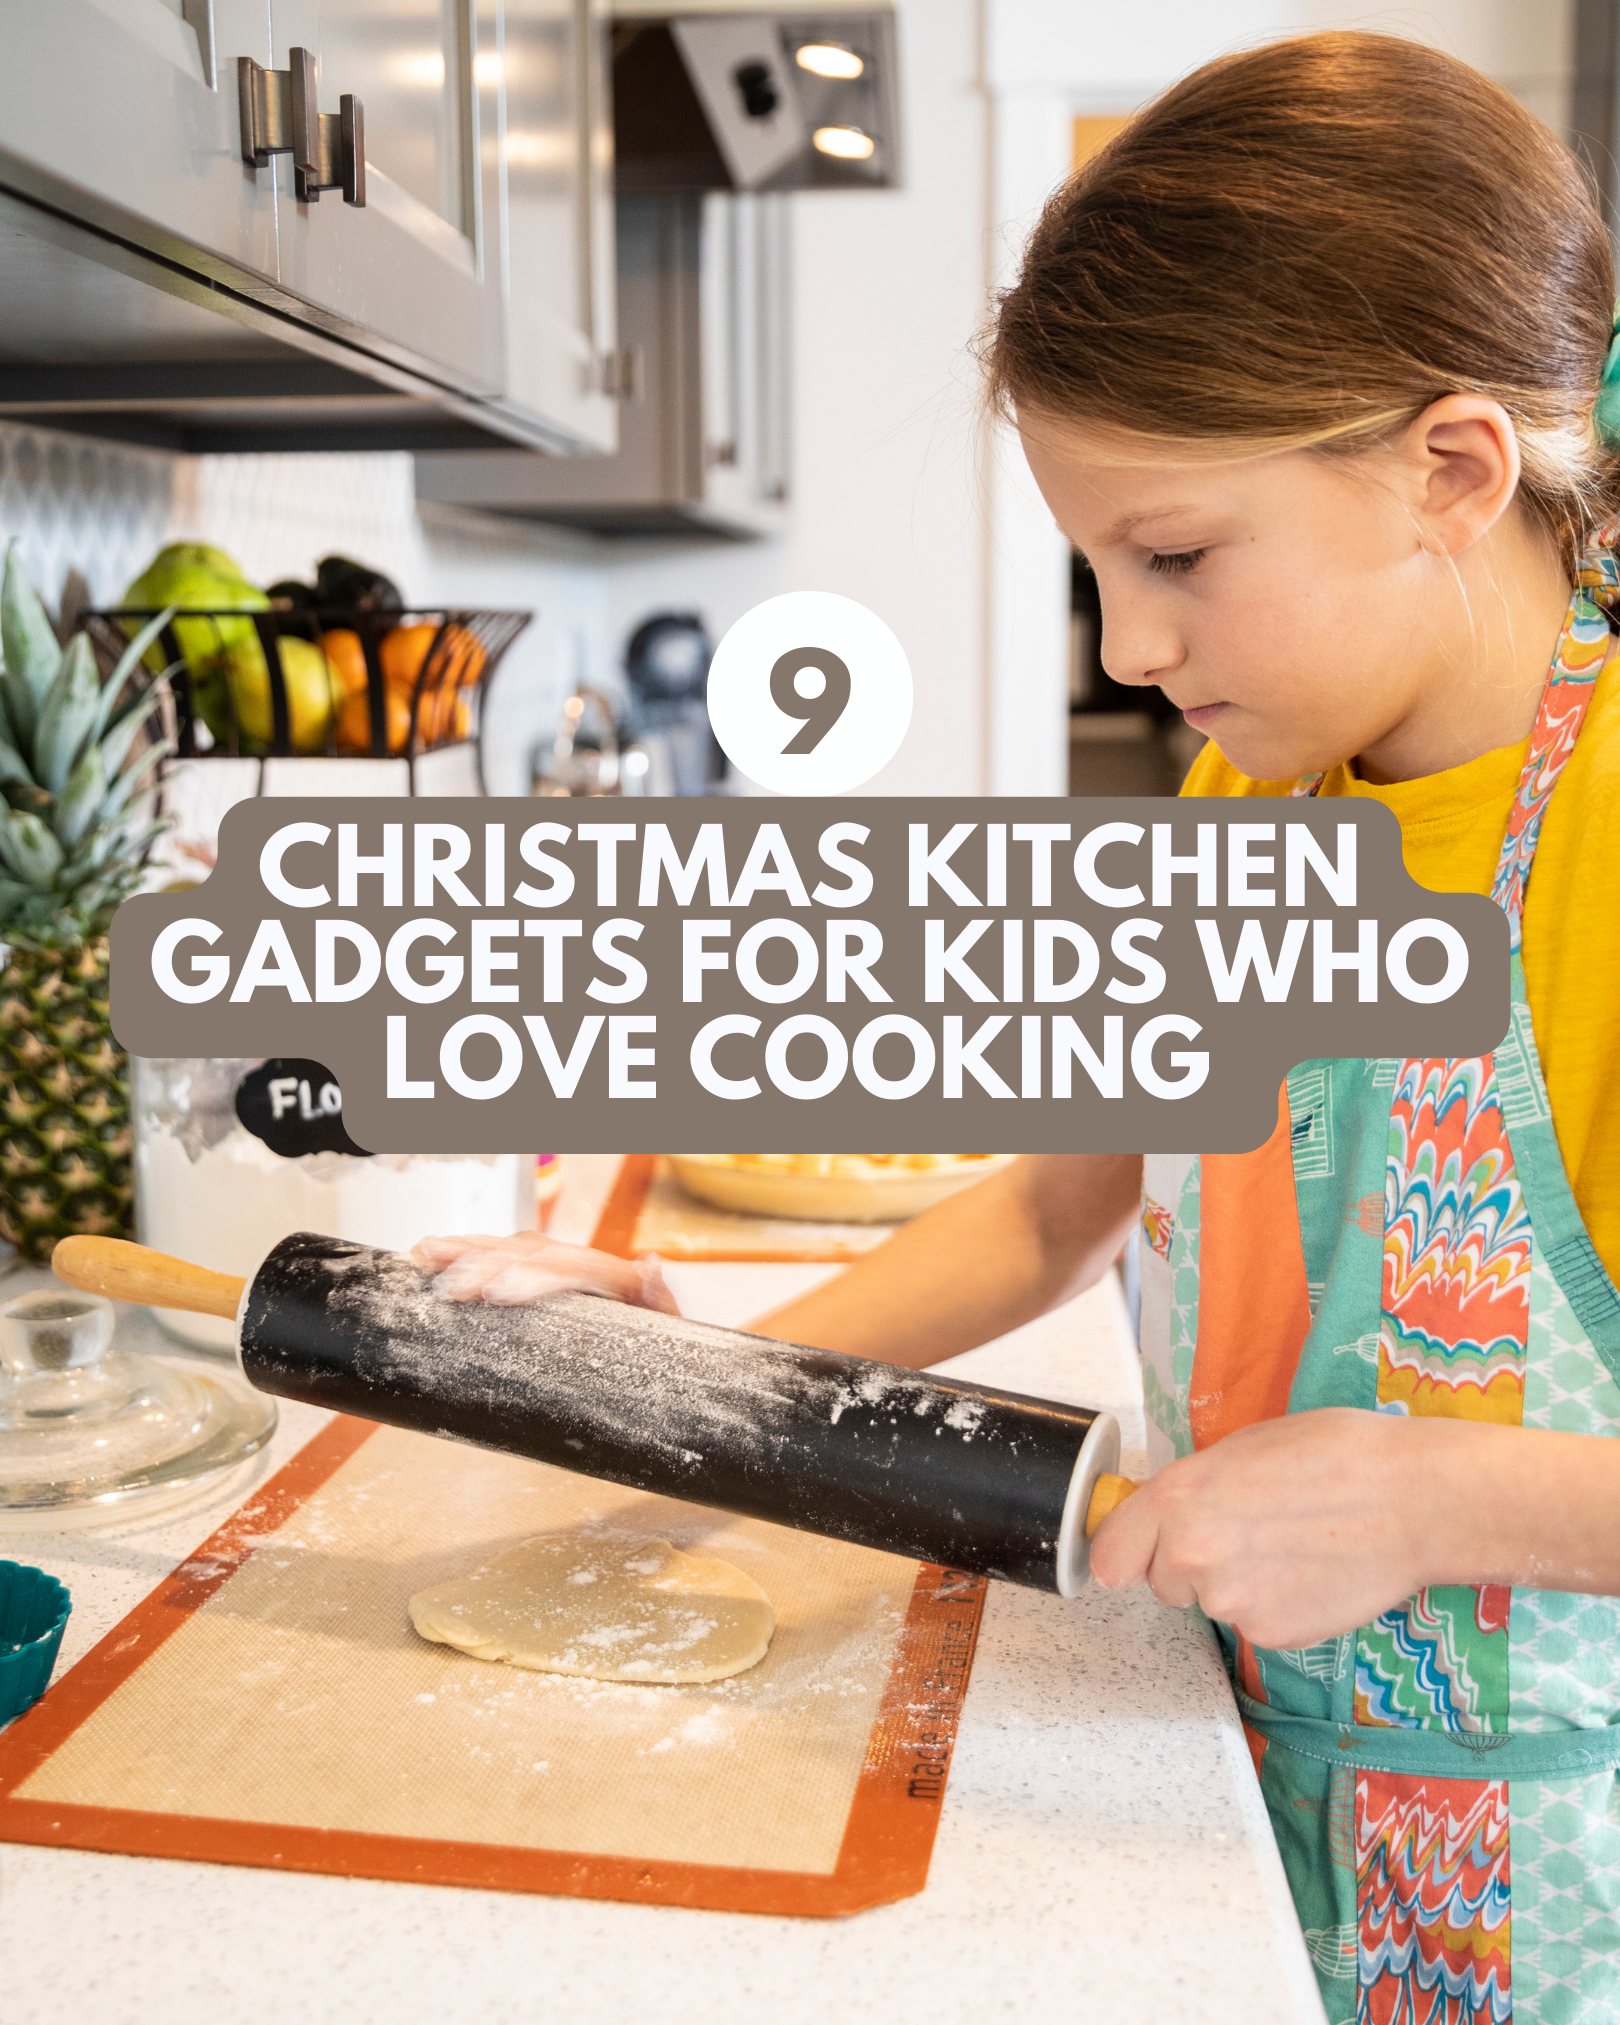 5 Christmas Kitchen Gadgets for Kids Who Love Cooking